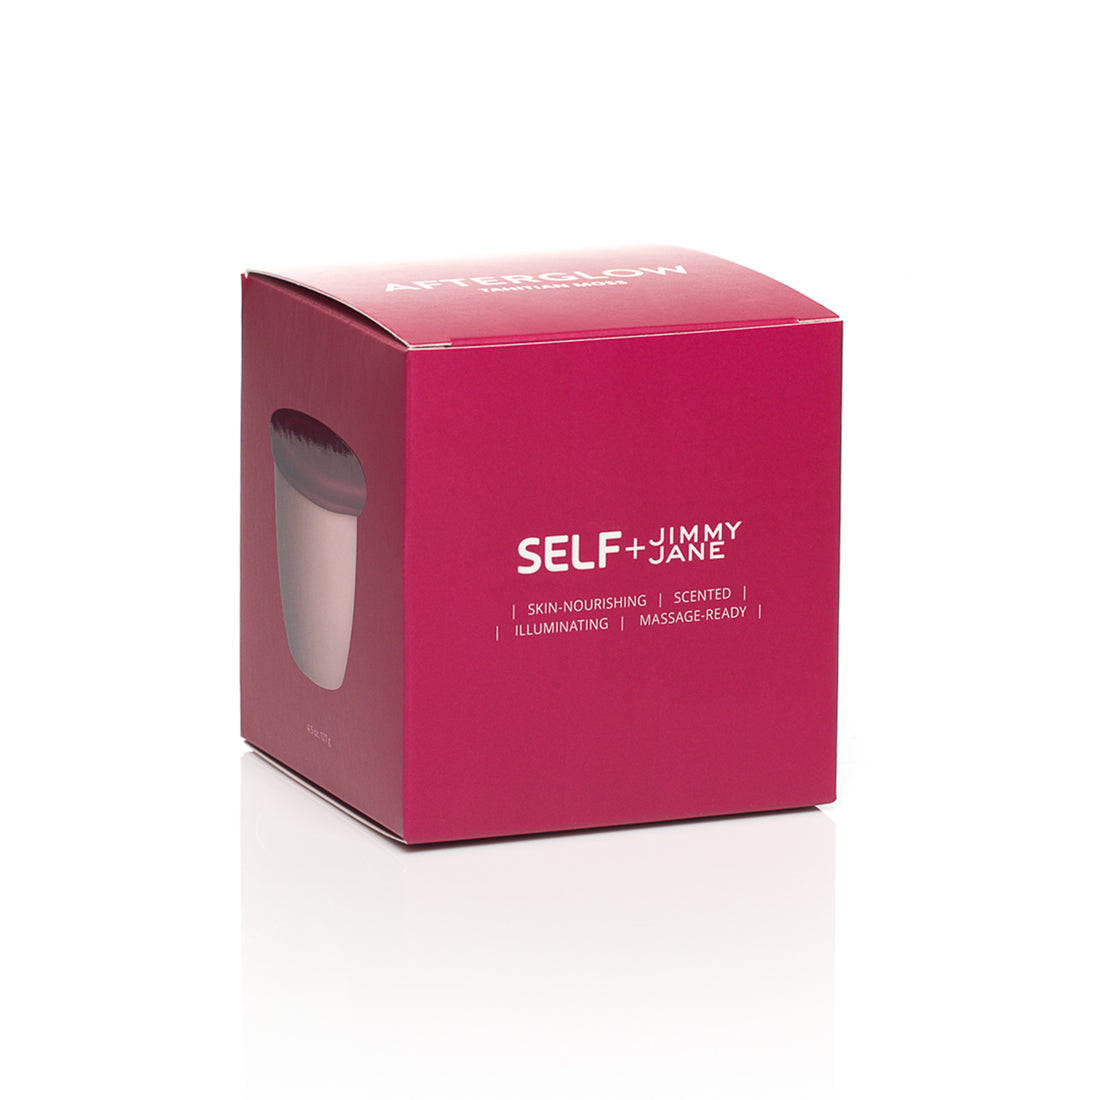 Self + Jimmyjane Tahitian Moss scented massage oil candle packaging